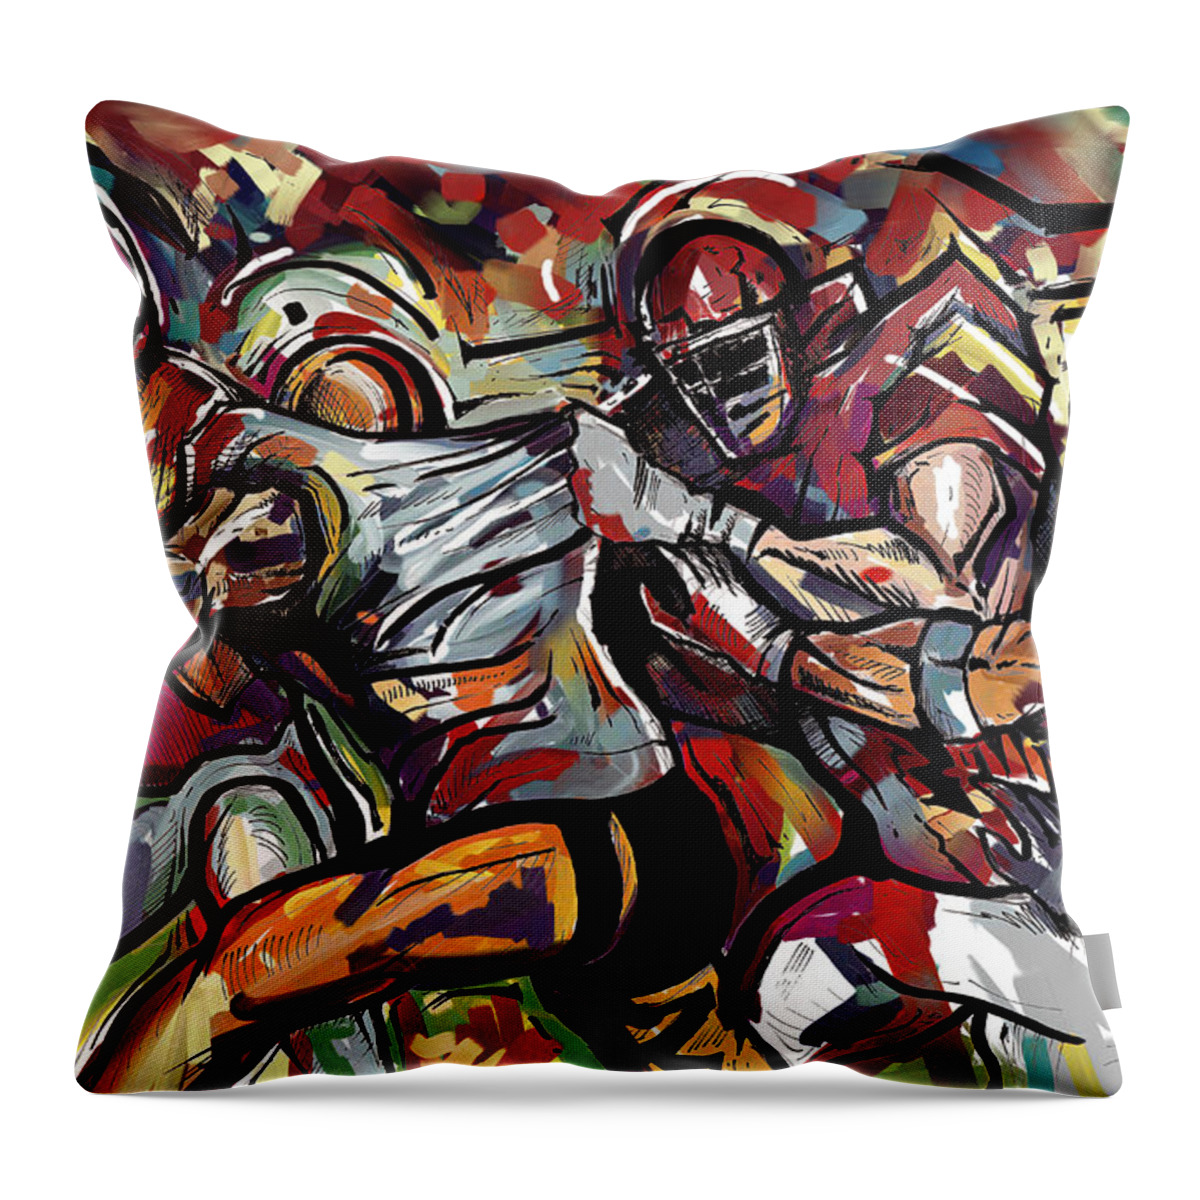 Football Throw Pillow featuring the painting FootBall Frawl by John Gholson